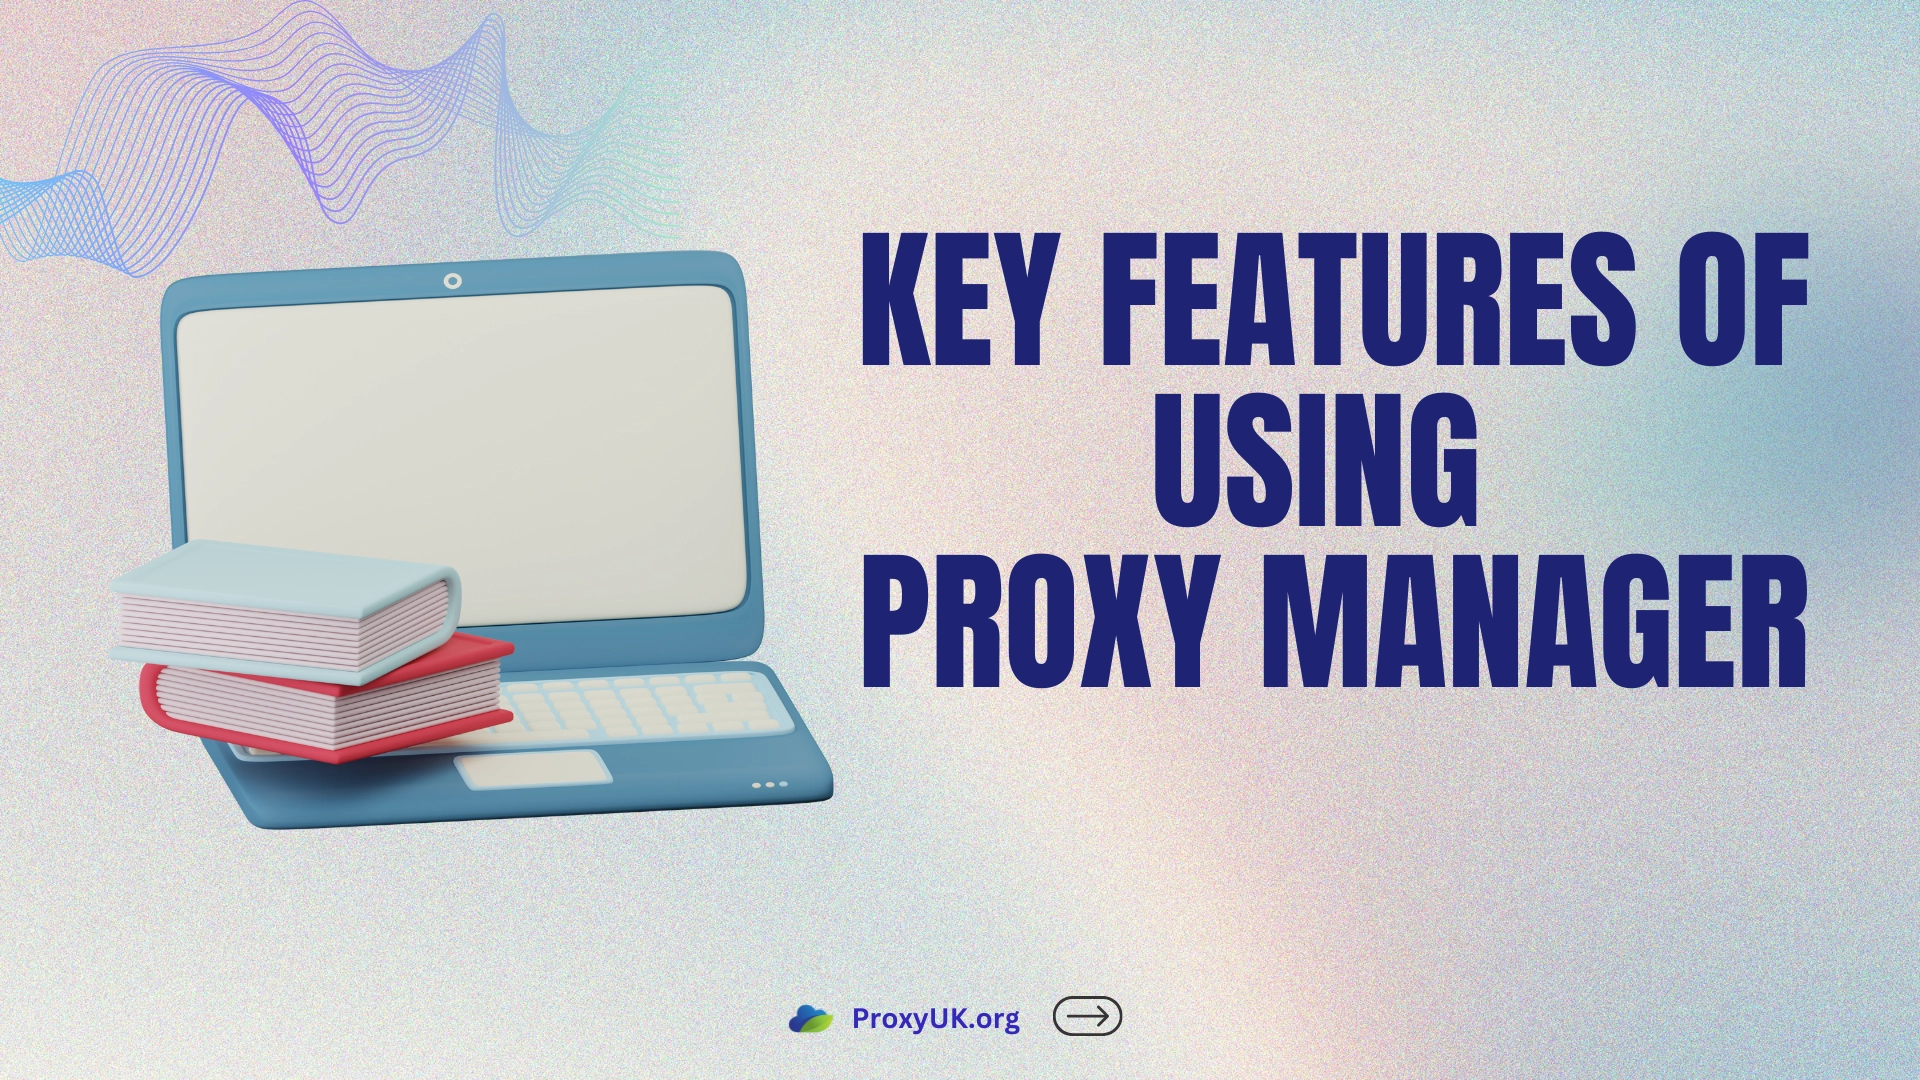 Key features of using proxy manager